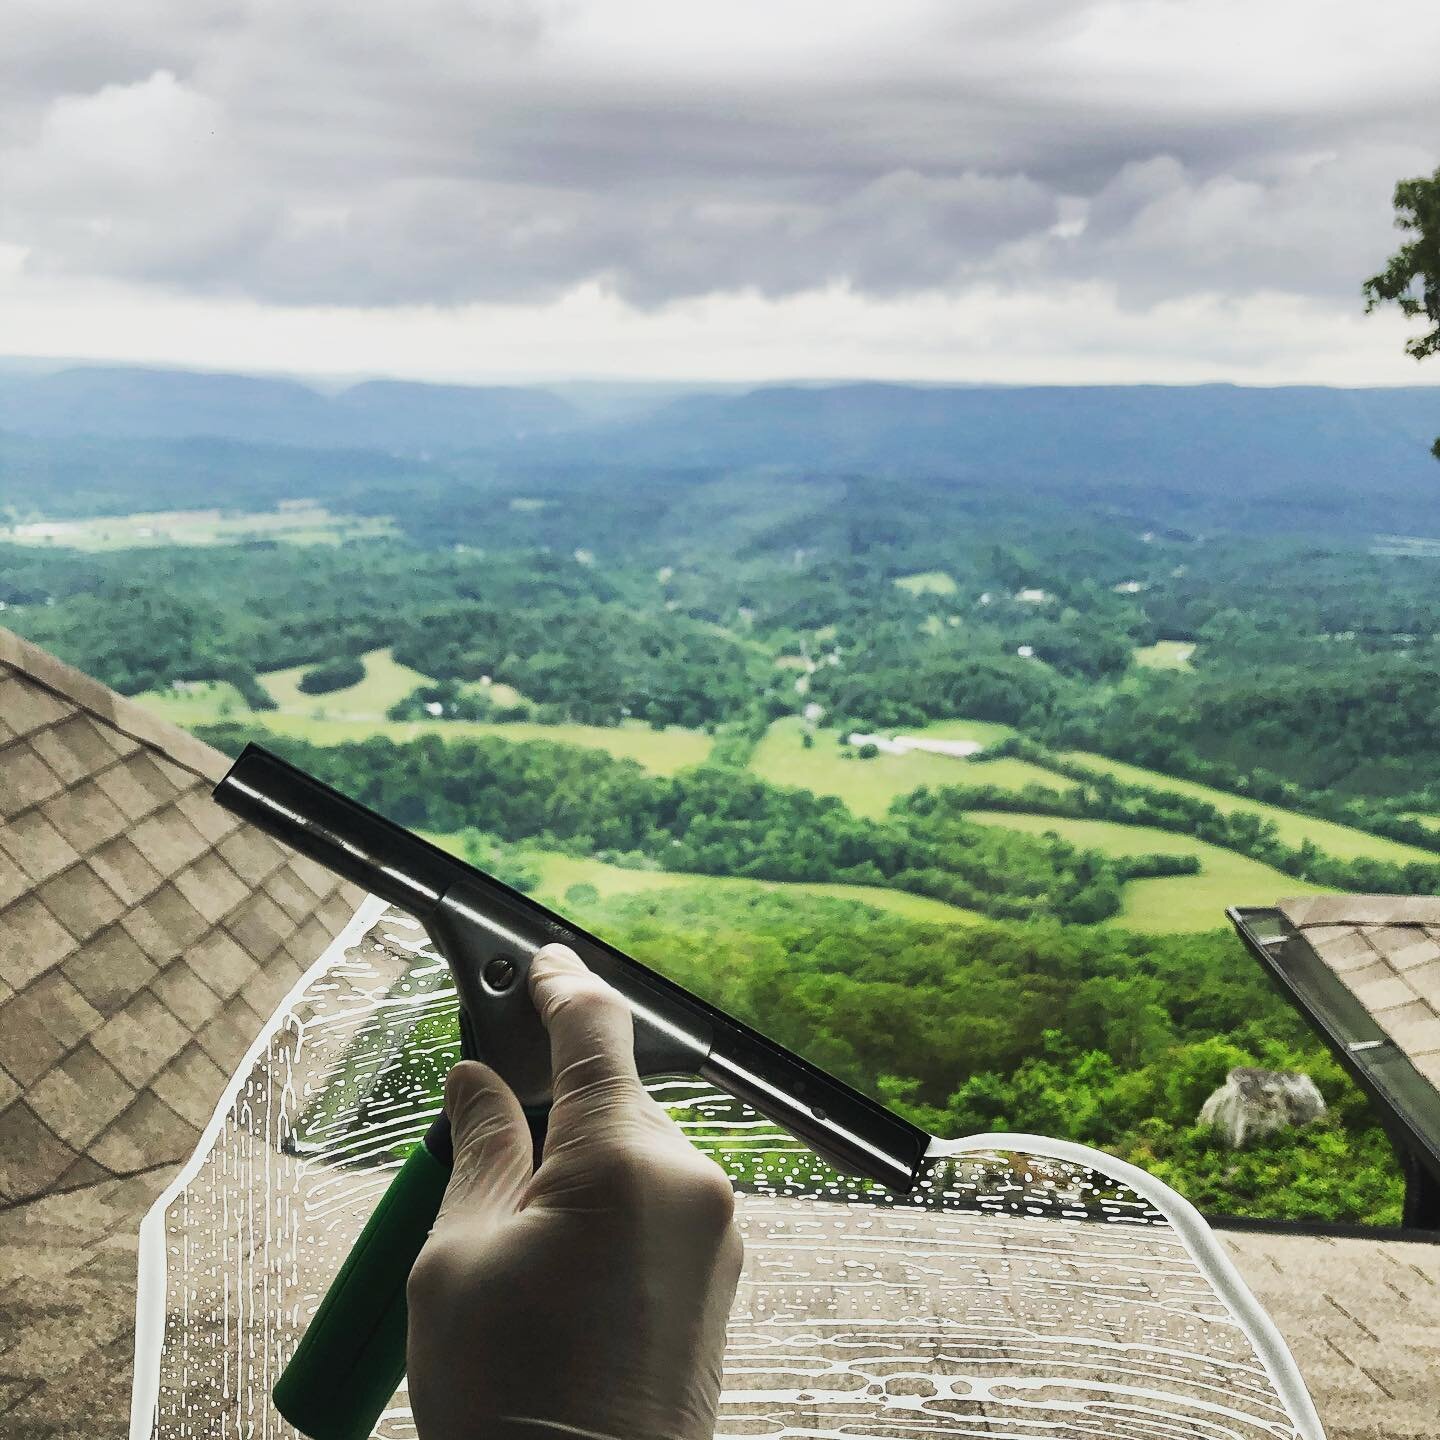 Summer never looked so good! Call today for a free estimate! (423)-497-6055
.
.
.

#chattanooga #chattanoogasmallbusiness #pressurewashing #windowcleaning #lookoutmountain #signalmountain #soddydaisy
#redbank #sceniccity